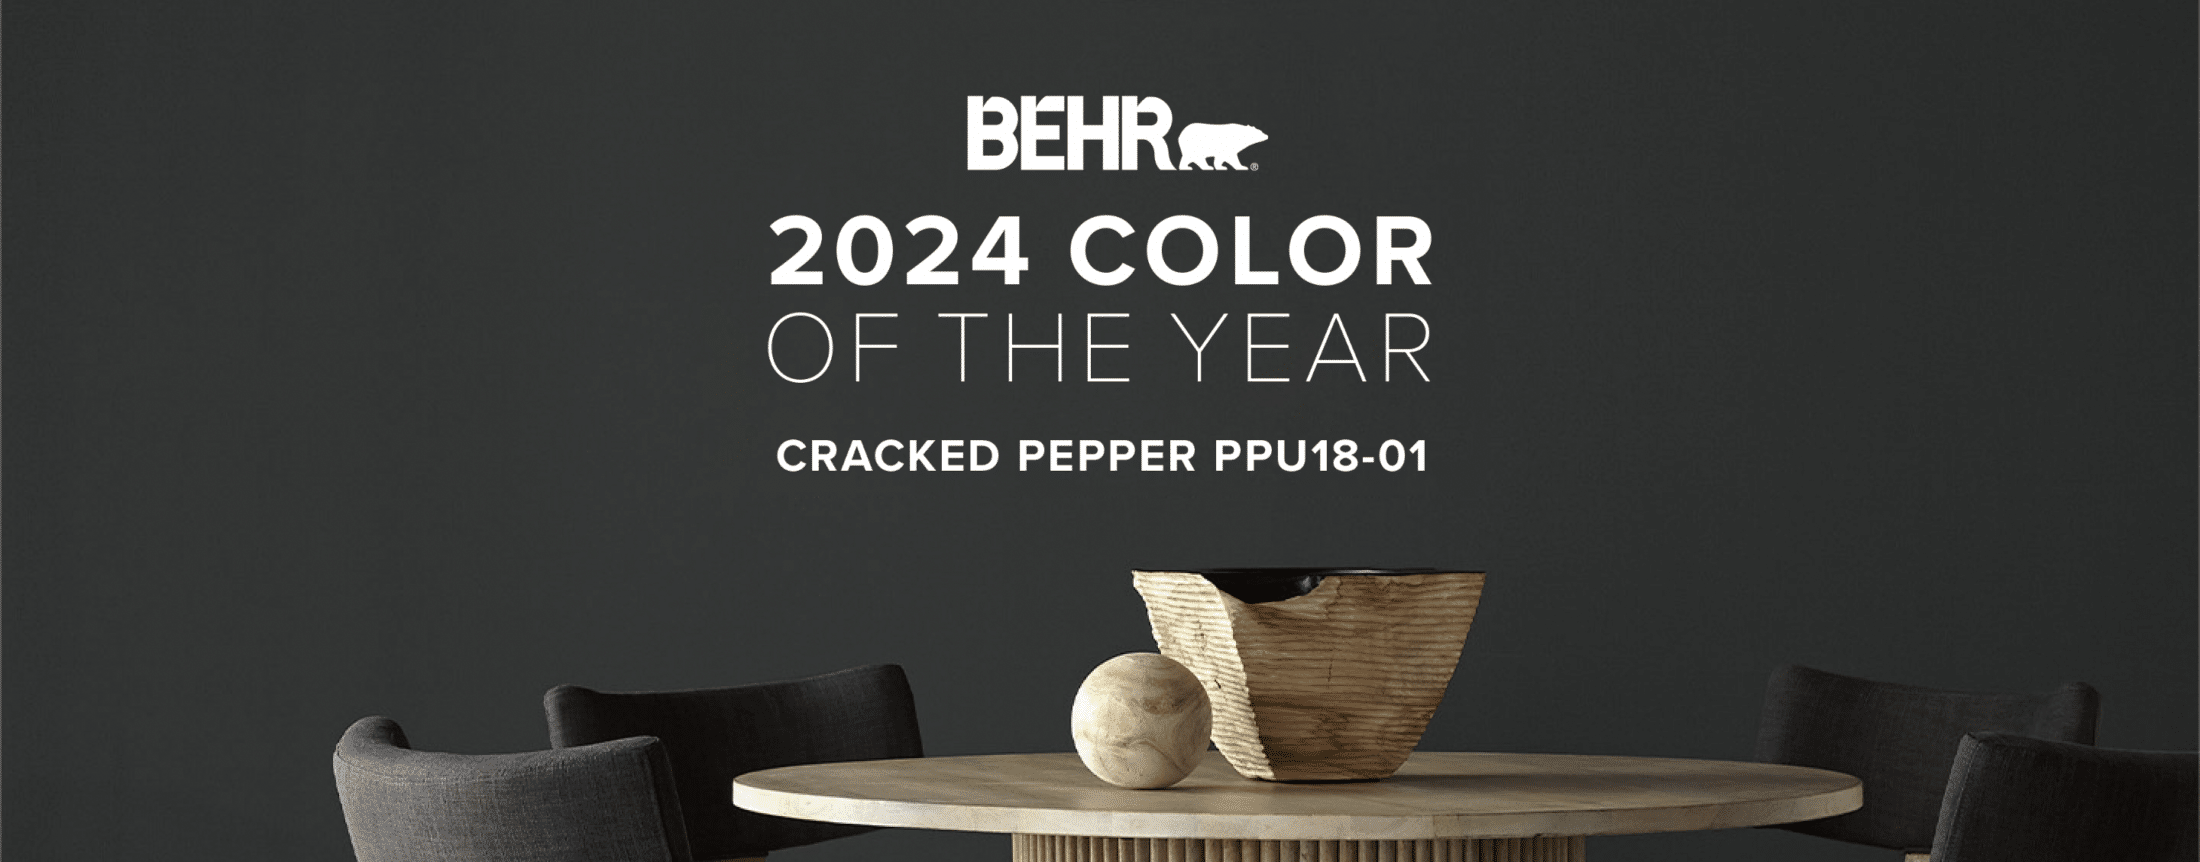 2024 Color of the Year: Behr and Valspar | WPL Interior Design